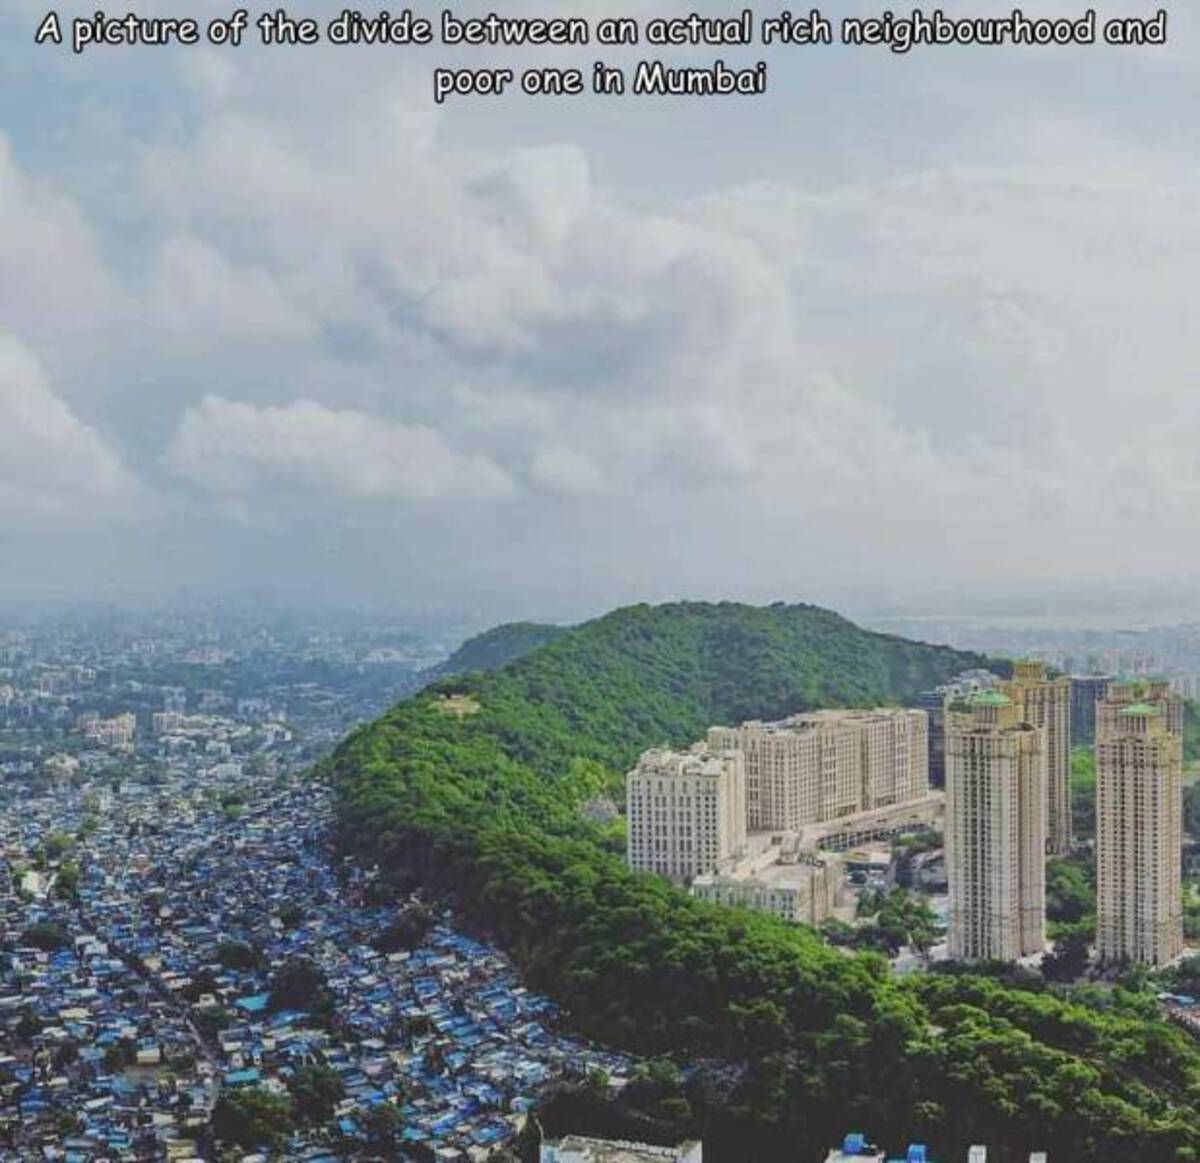 rich poor divide india - A picture of the divide between an actual rich neighbourhood and poor one in Mumbai